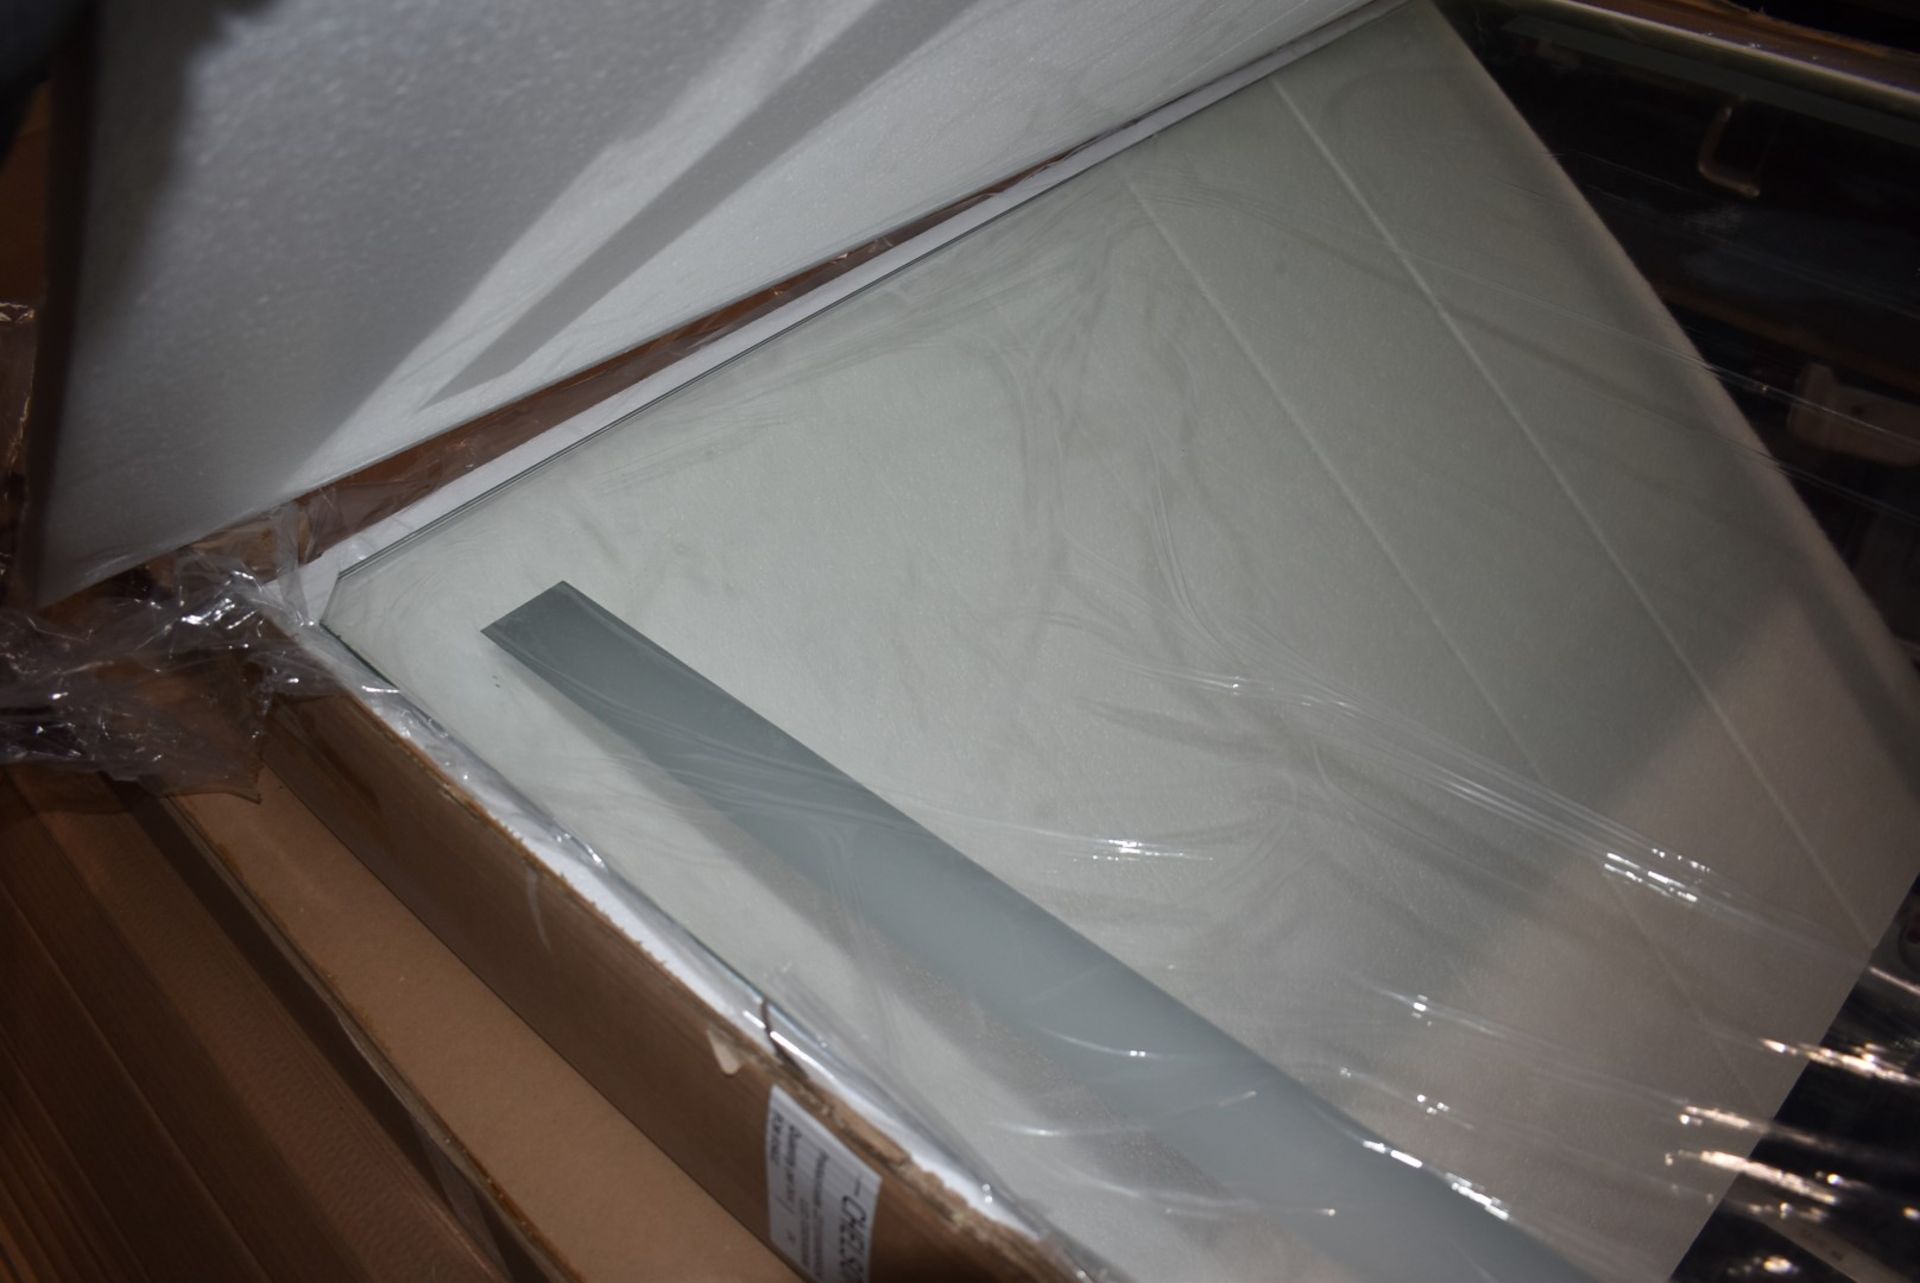 1 x Chelsom Large Illuminated LED Bathroom Mirror With Demister - Brand New Stock - As Used in Major - Image 7 of 10